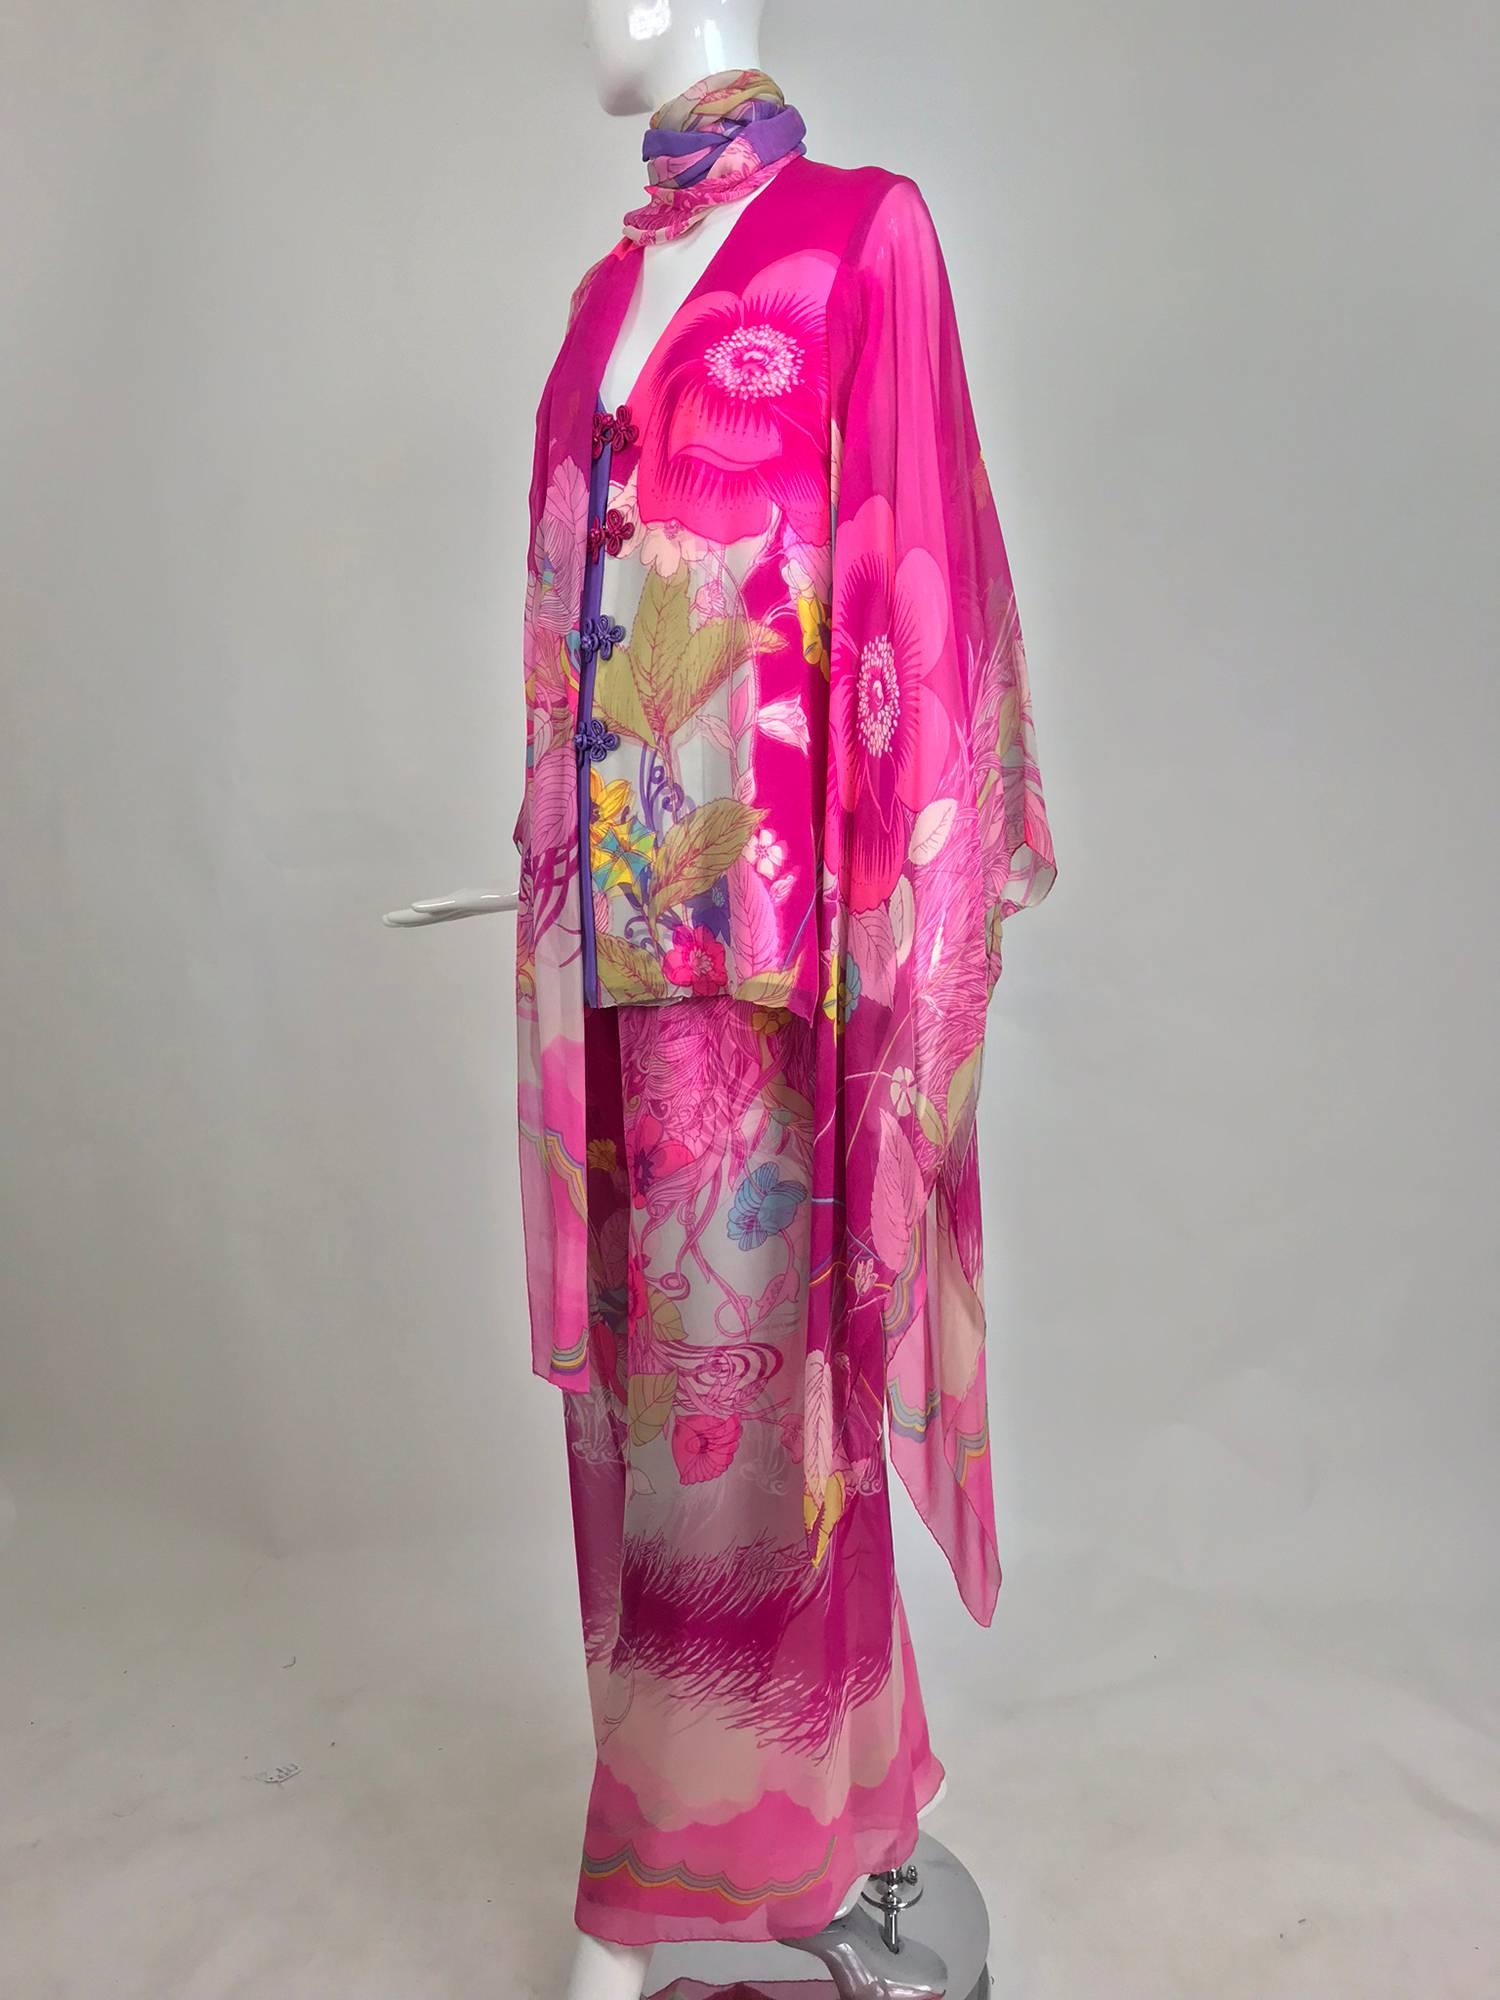 Early Hanae Mori Couture silk kimono evening trouser set in a vibrant pink floral print, the same style in another colour way is found in the collection of the Metropolitan Museum and dated 1966-69...This set is exquisitely constructed of  printed